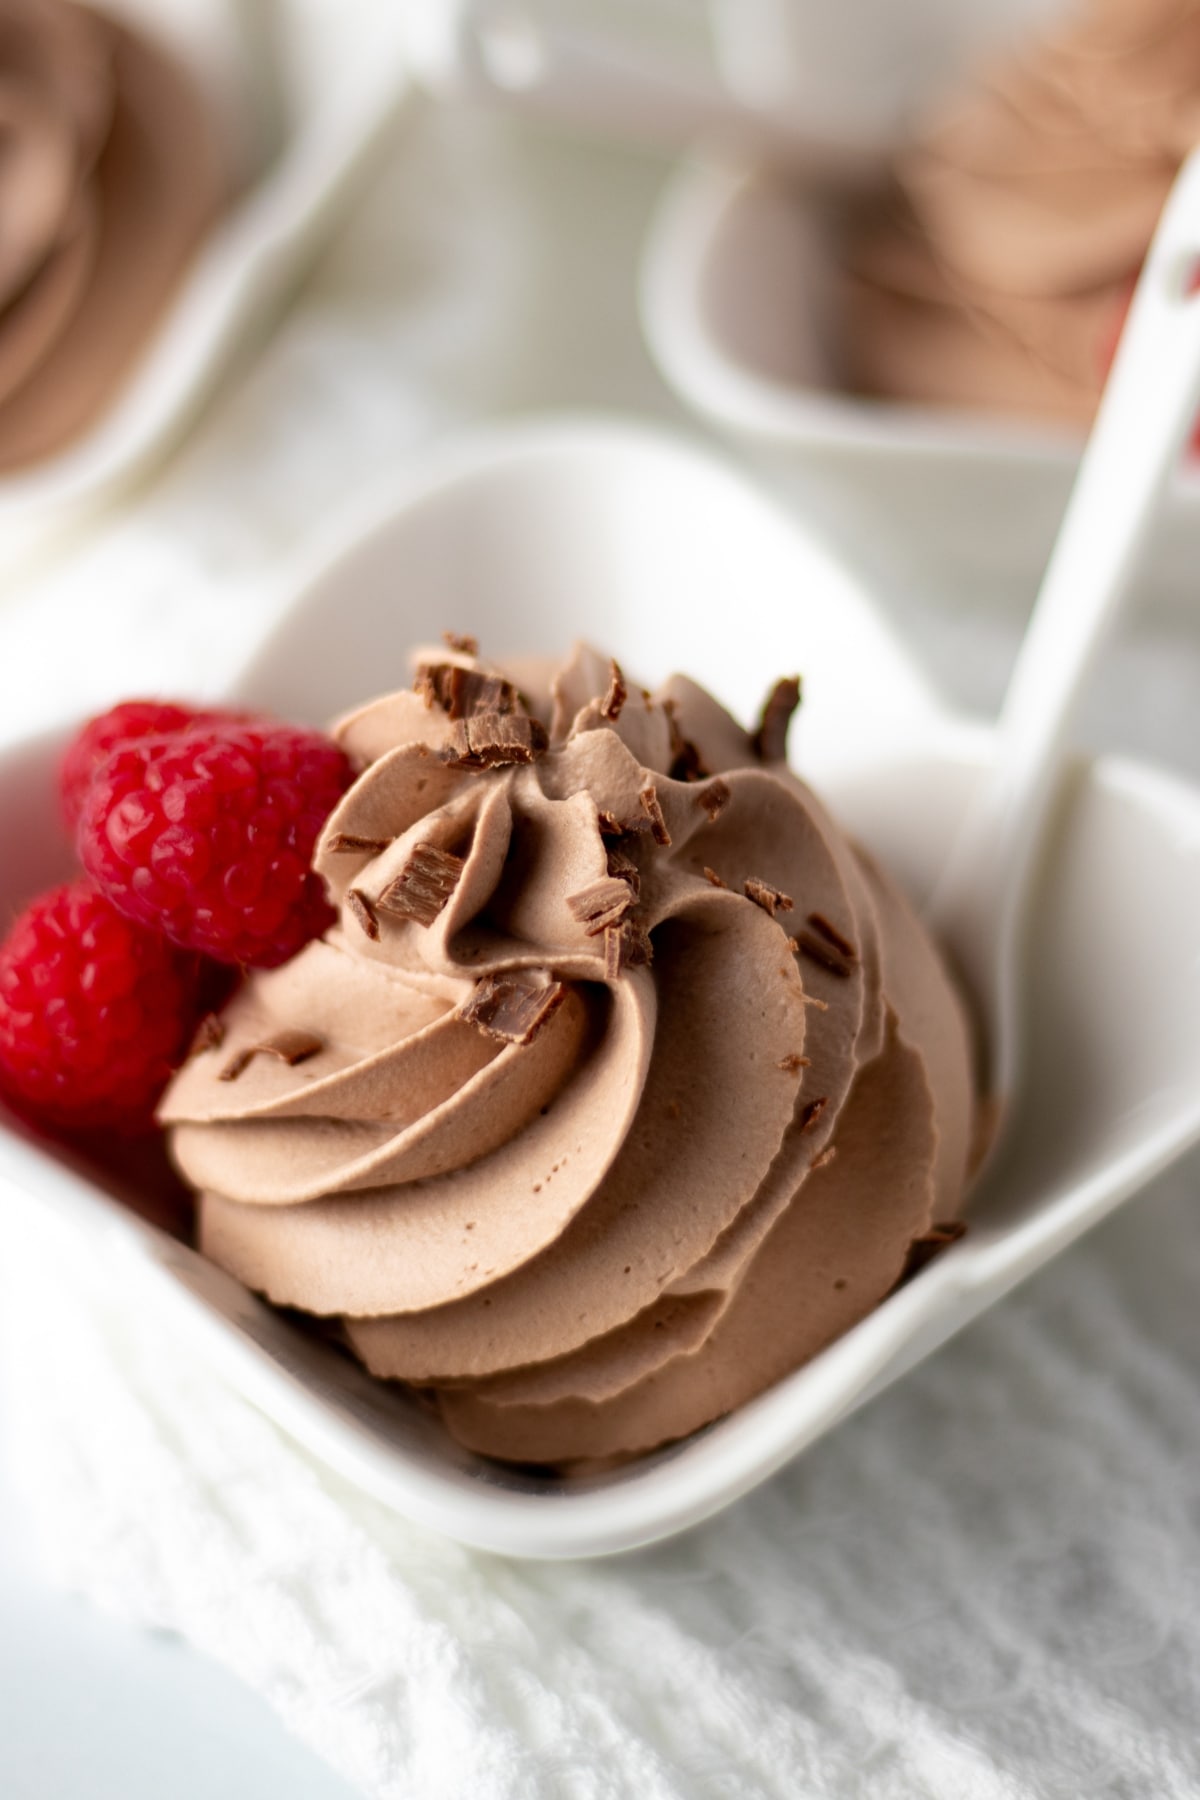 A small dish with a swirl of chocolate mousse sprinkled with chocolate and garnished with 3 red raspberries.